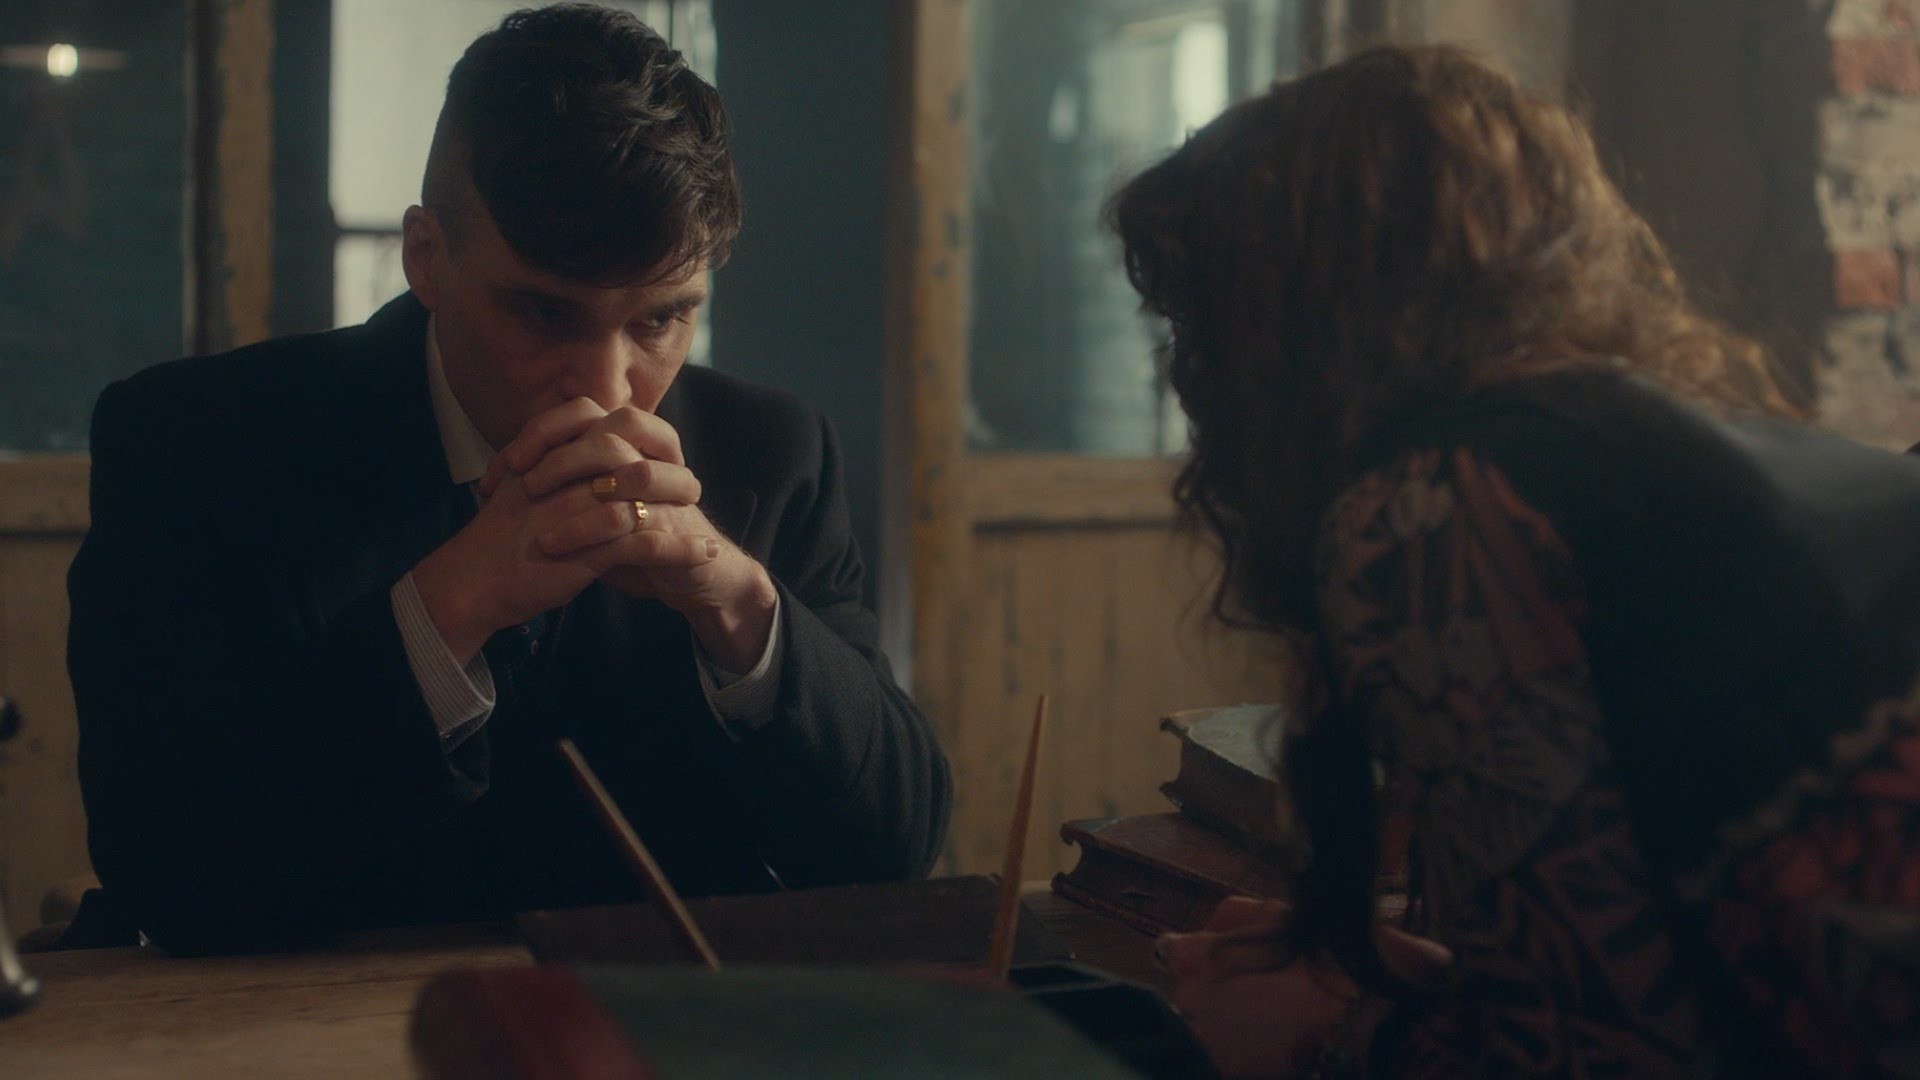 1920x1080 The gypsy half is stronger - Peaky Blinders: Series 2 Episode 5 Preview -  BBC Two